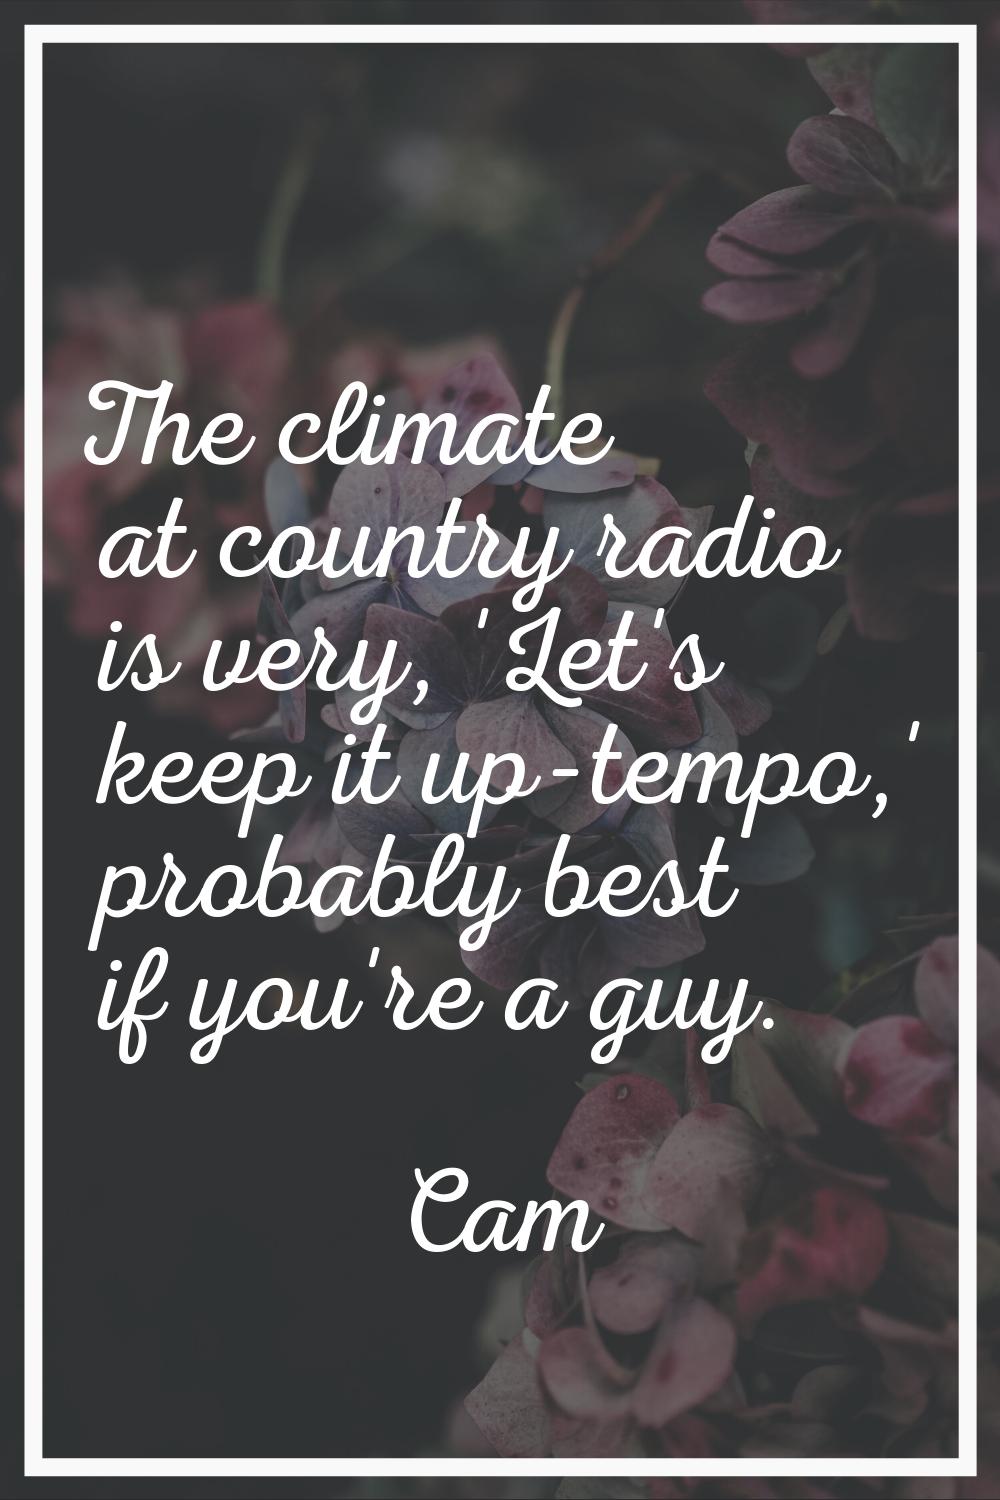 The climate at country radio is very, 'Let's keep it up-tempo,' probably best if you're a guy.